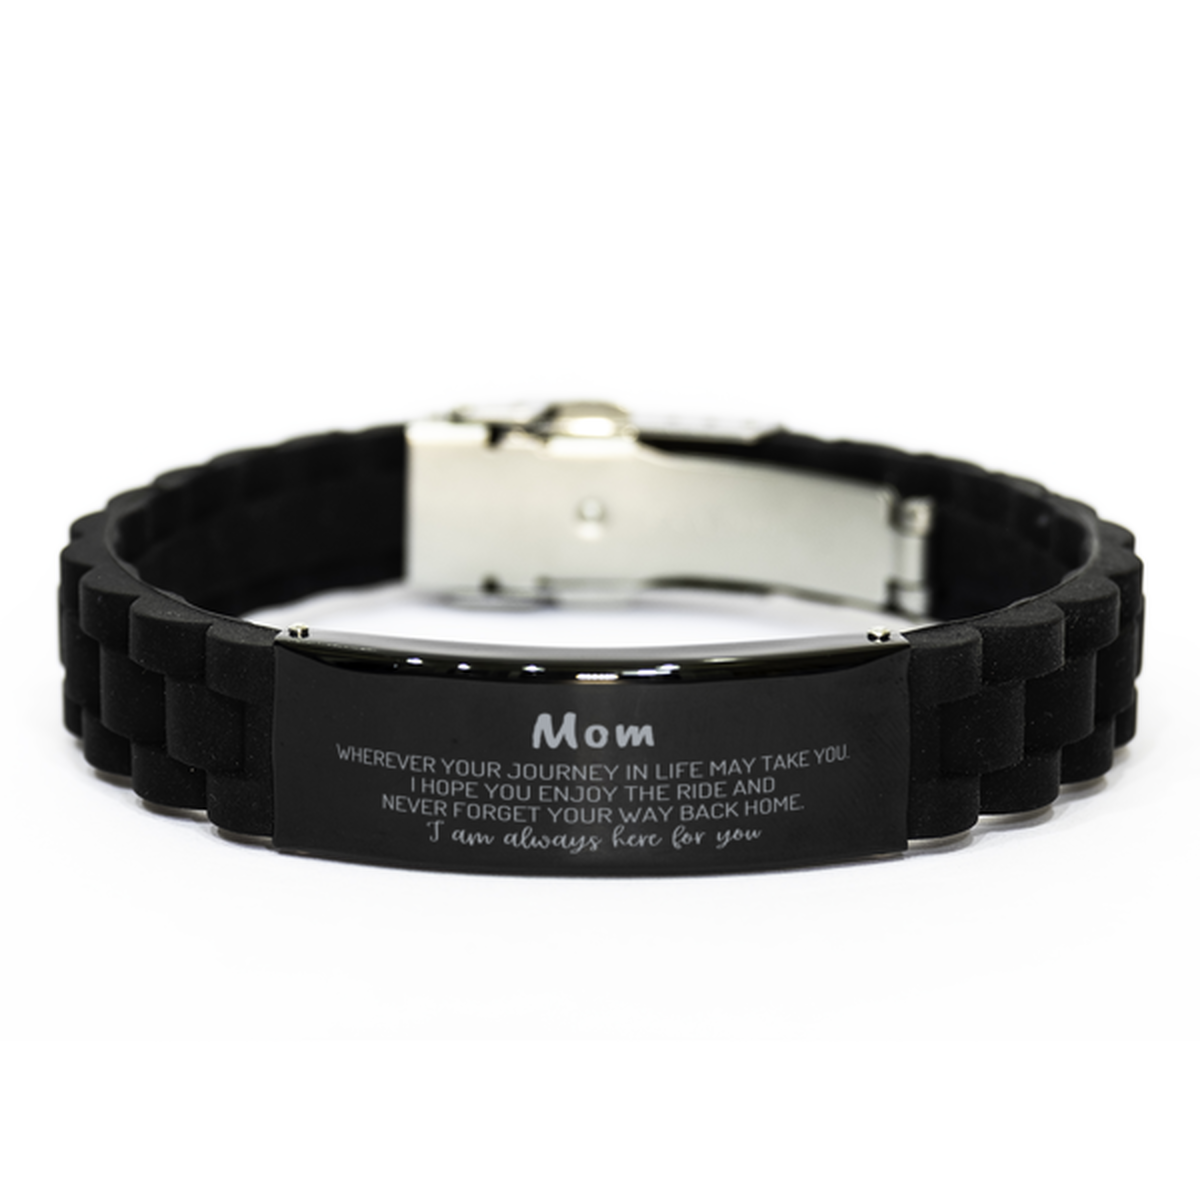 Mom wherever your journey in life may take you, I am always here for you Mom Black Glidelock Clasp Bracelet, Awesome Christmas Gifts For Mom, Mom Birthday Gifts for Men Women Family Loved One